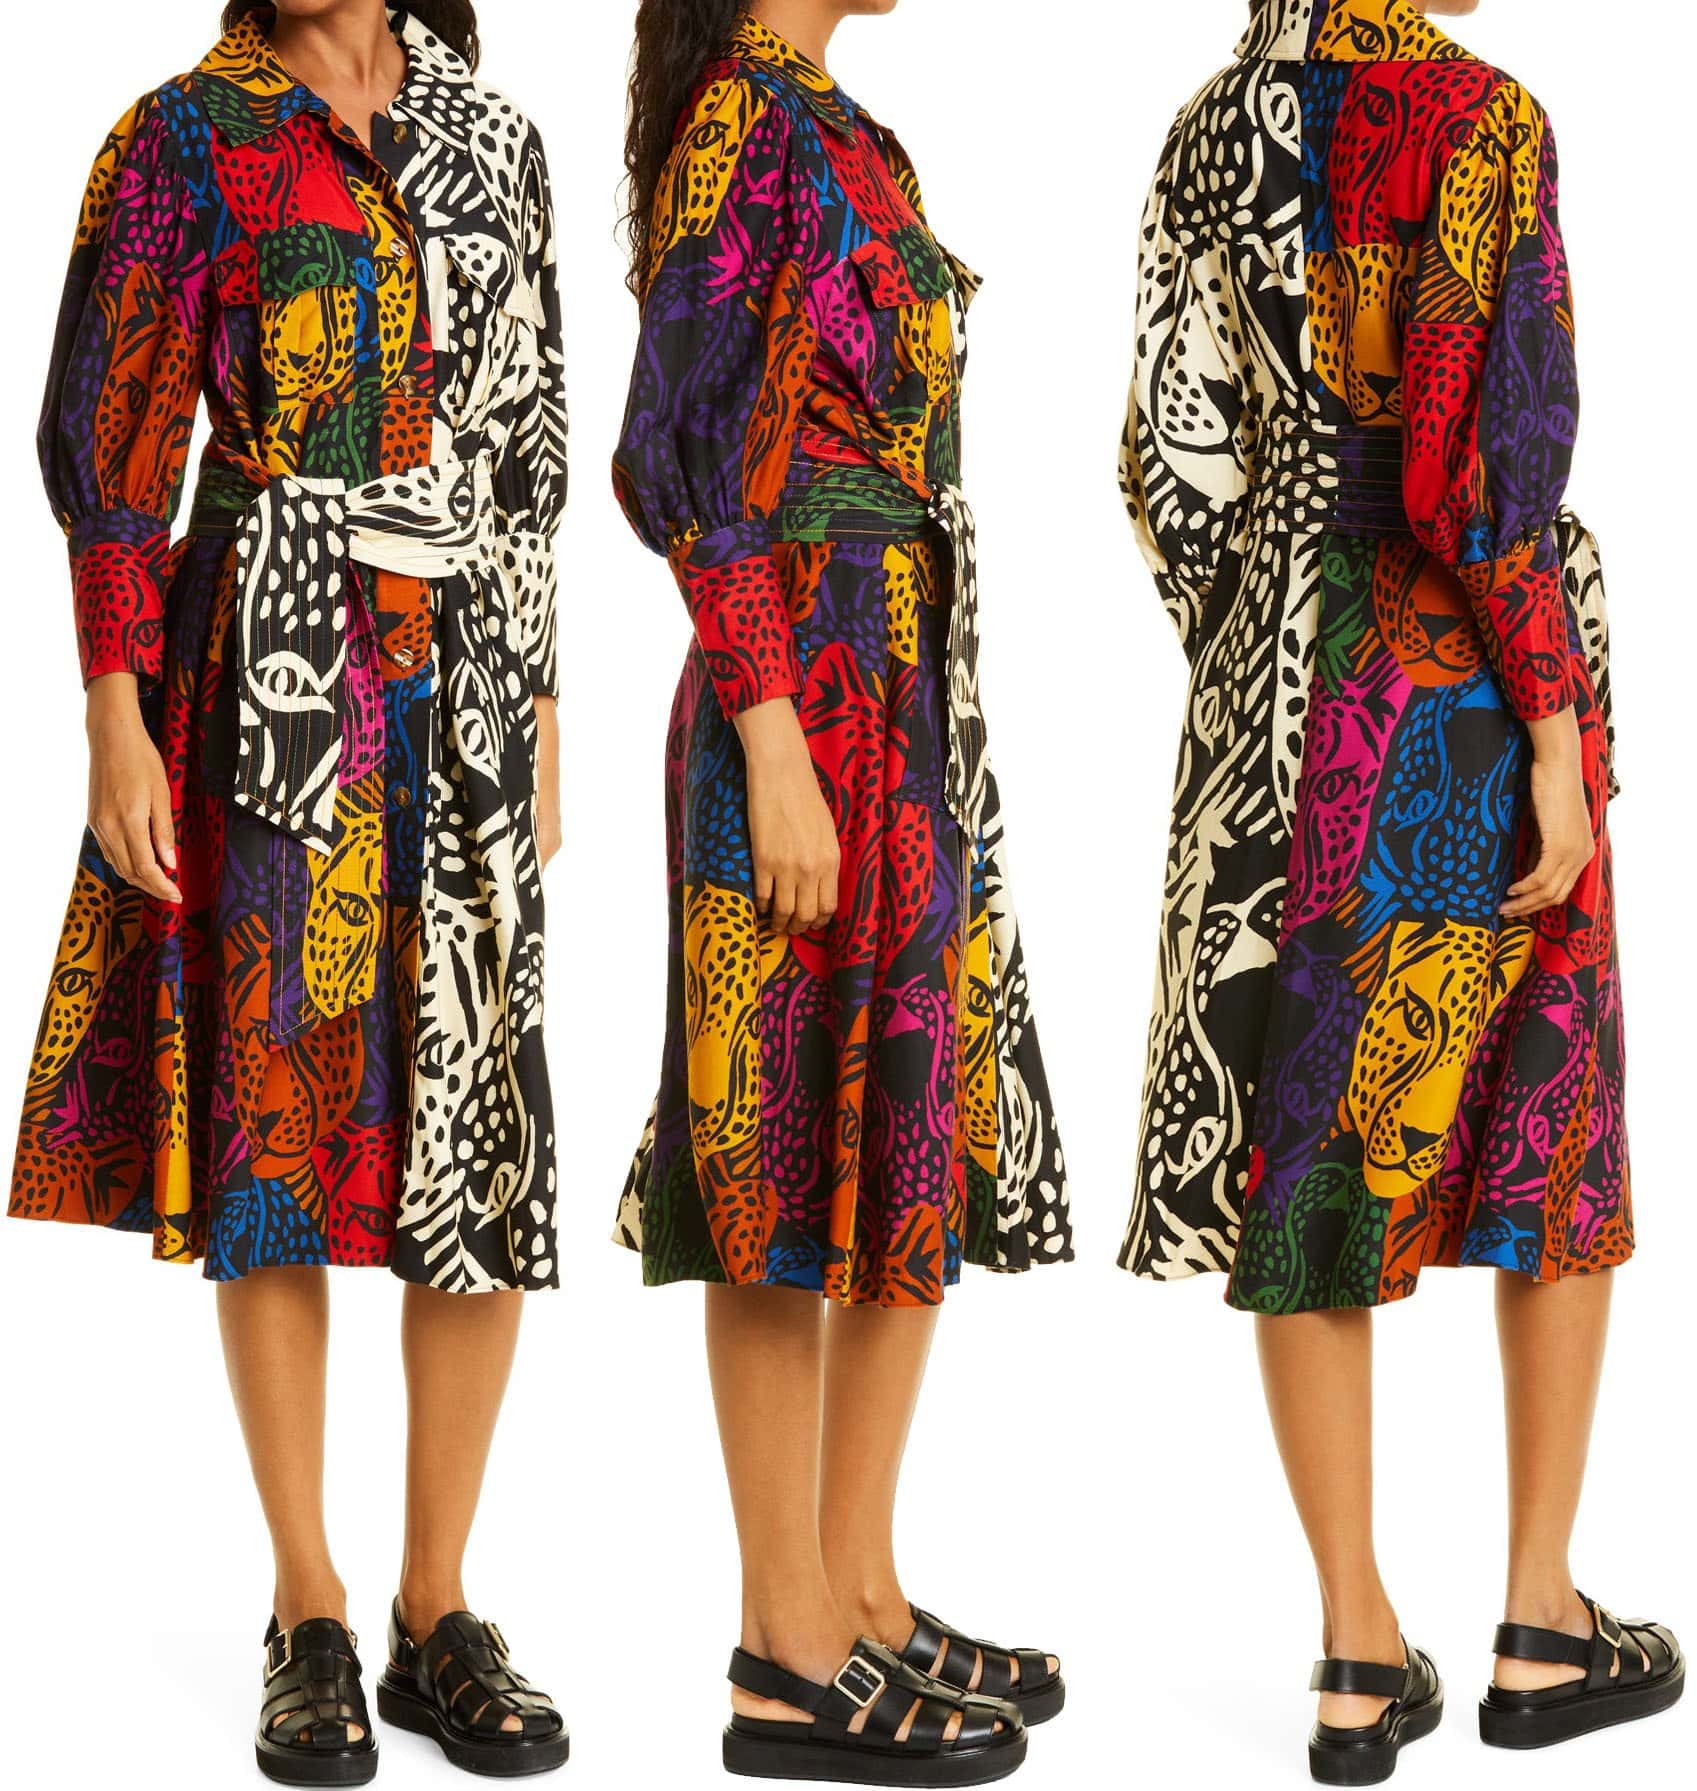 A fierce addition to any wardrobe, the Mixed Midnight shirtdress boasts a colorful wild print, trendy puff sleeves, and a removable sash belt